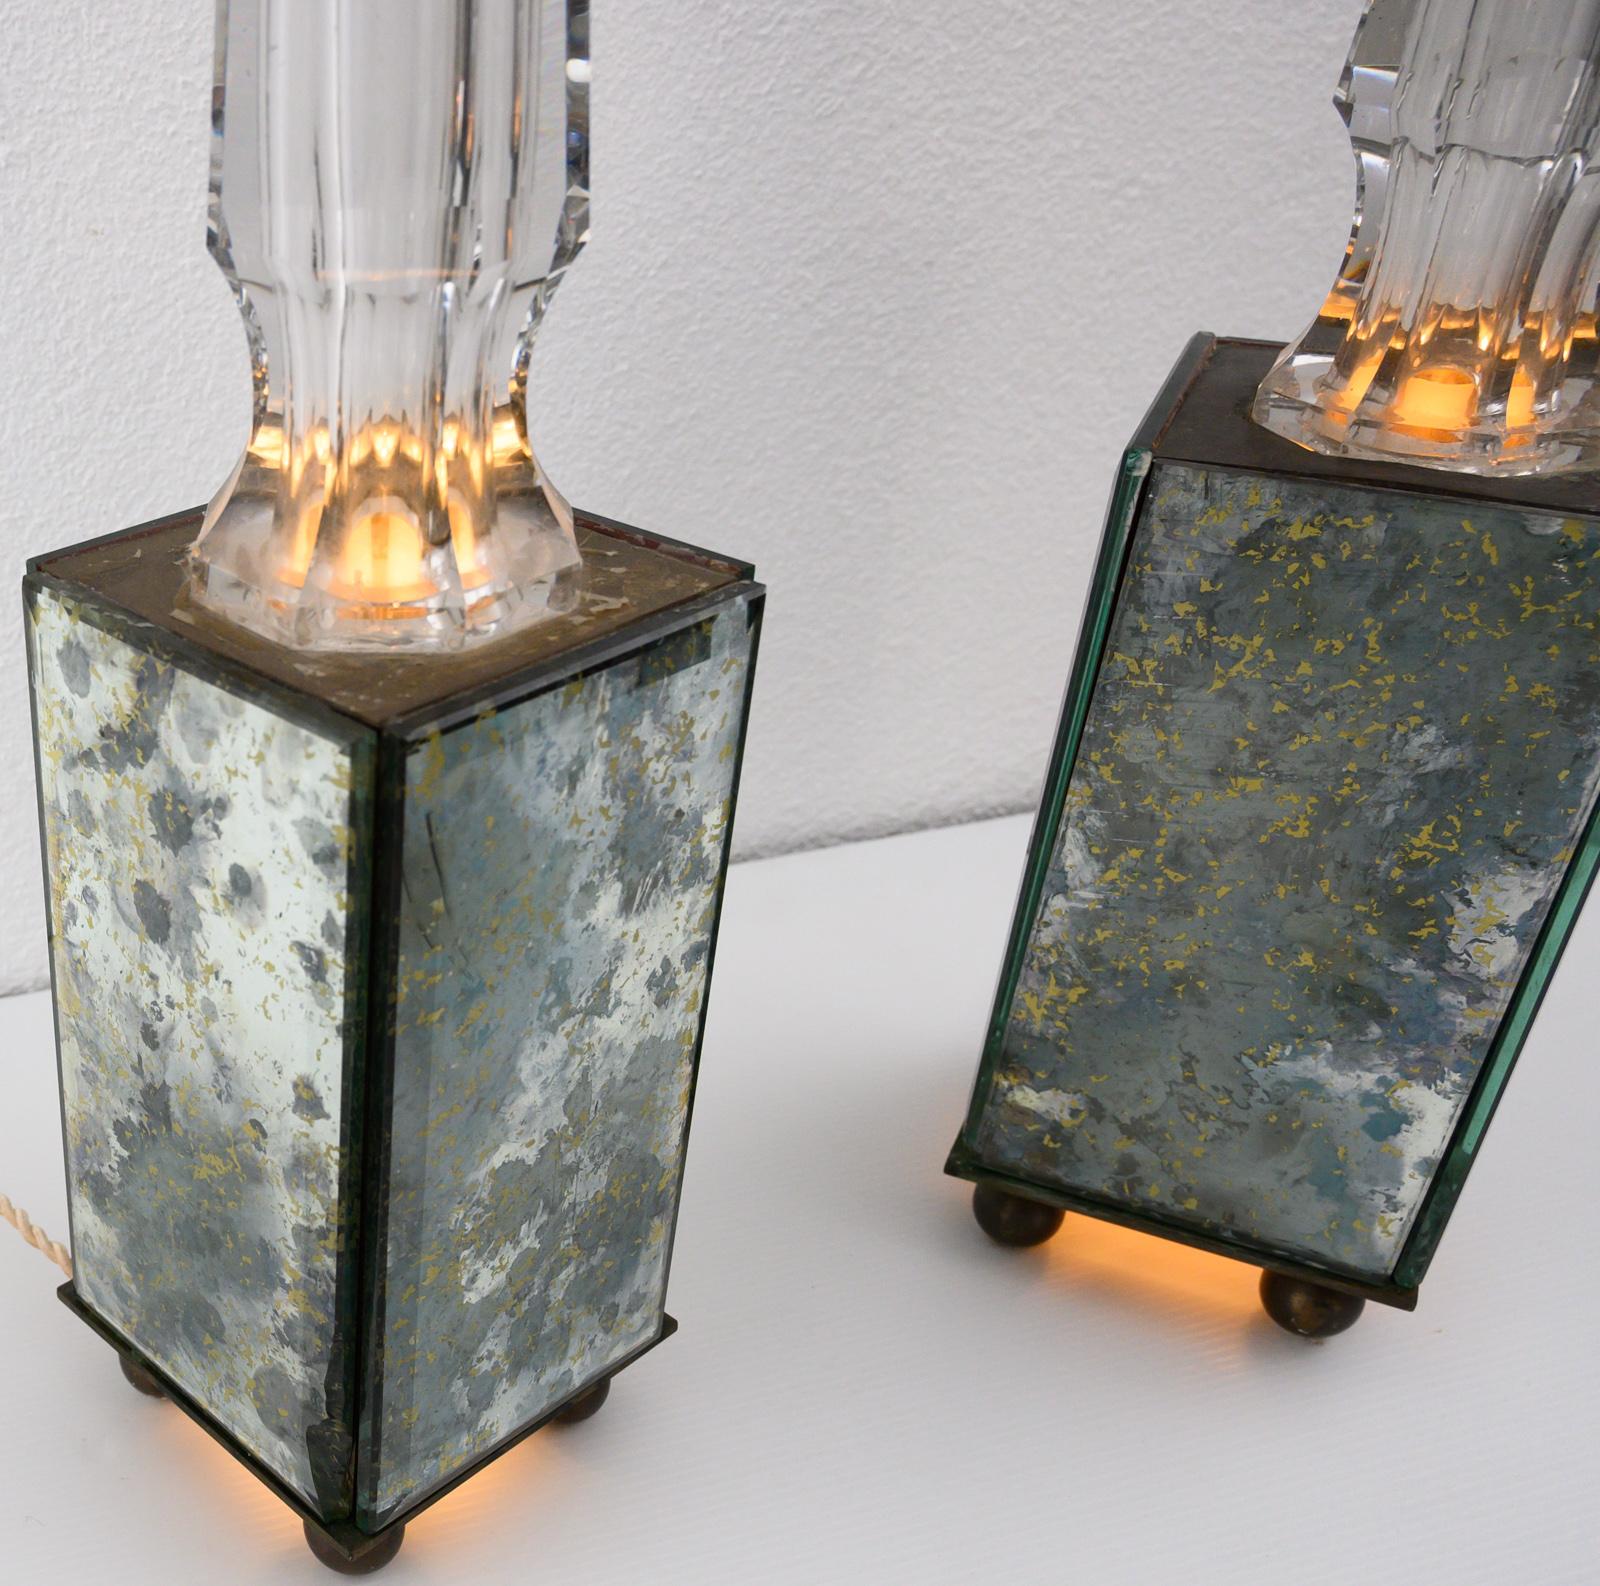 Brass Pair of Obelisk Lamps in the Style of Serge Roche, France circa 1940